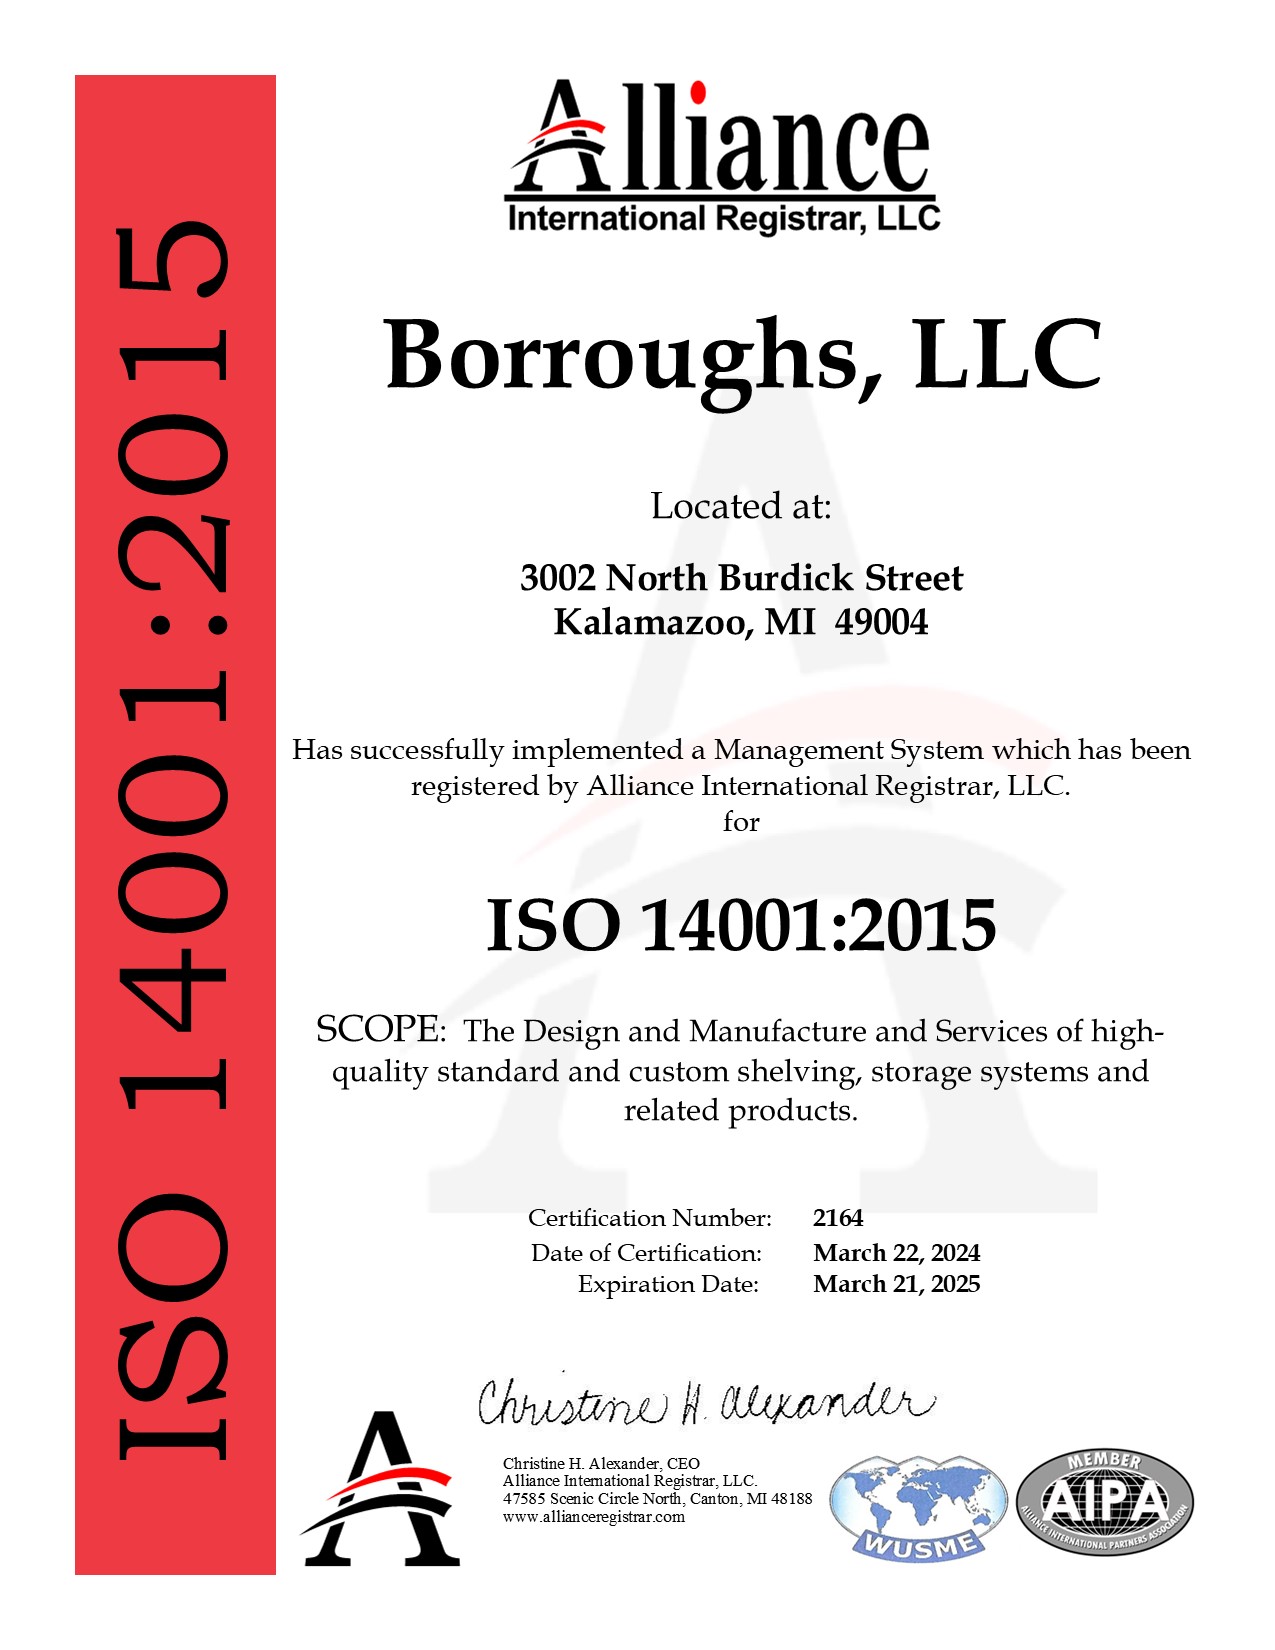 ISO 14001:2015 March 22, 2024 certification. Borroughs has successfully implemented a Management System which has been registered by Alliance Internal Registrar, LLC. The design and manufacture and services of high-quality standard and custom shelving, storage systems, and related products.